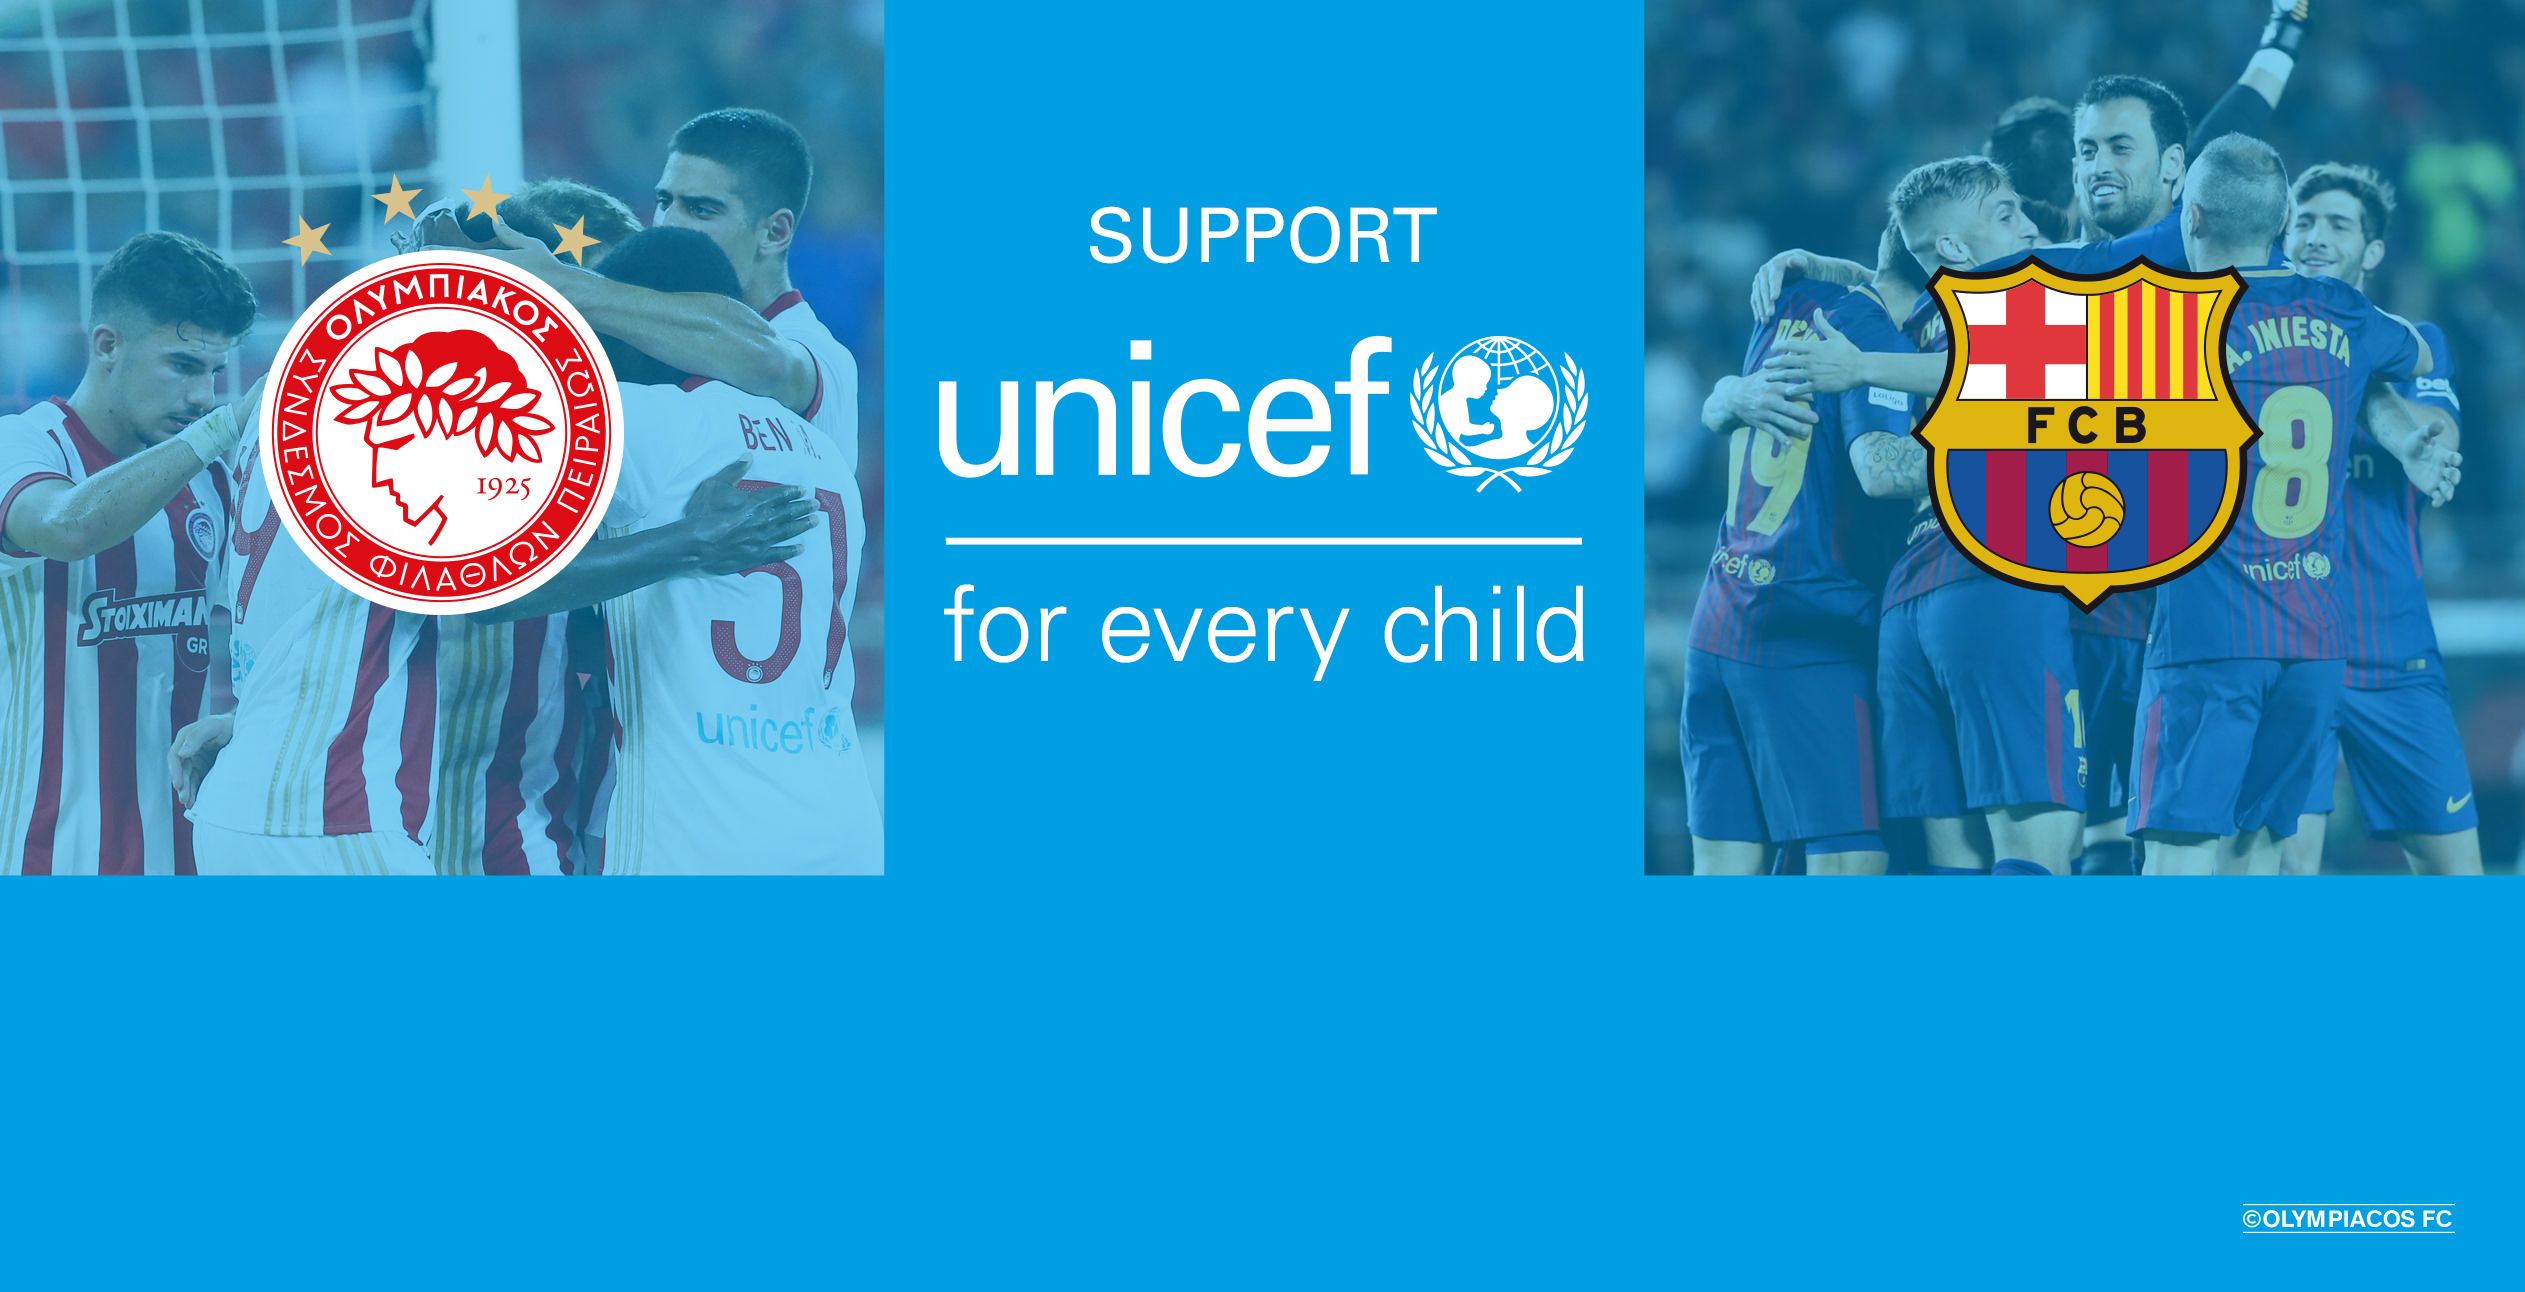 “We have joined our forces for UNICEF”